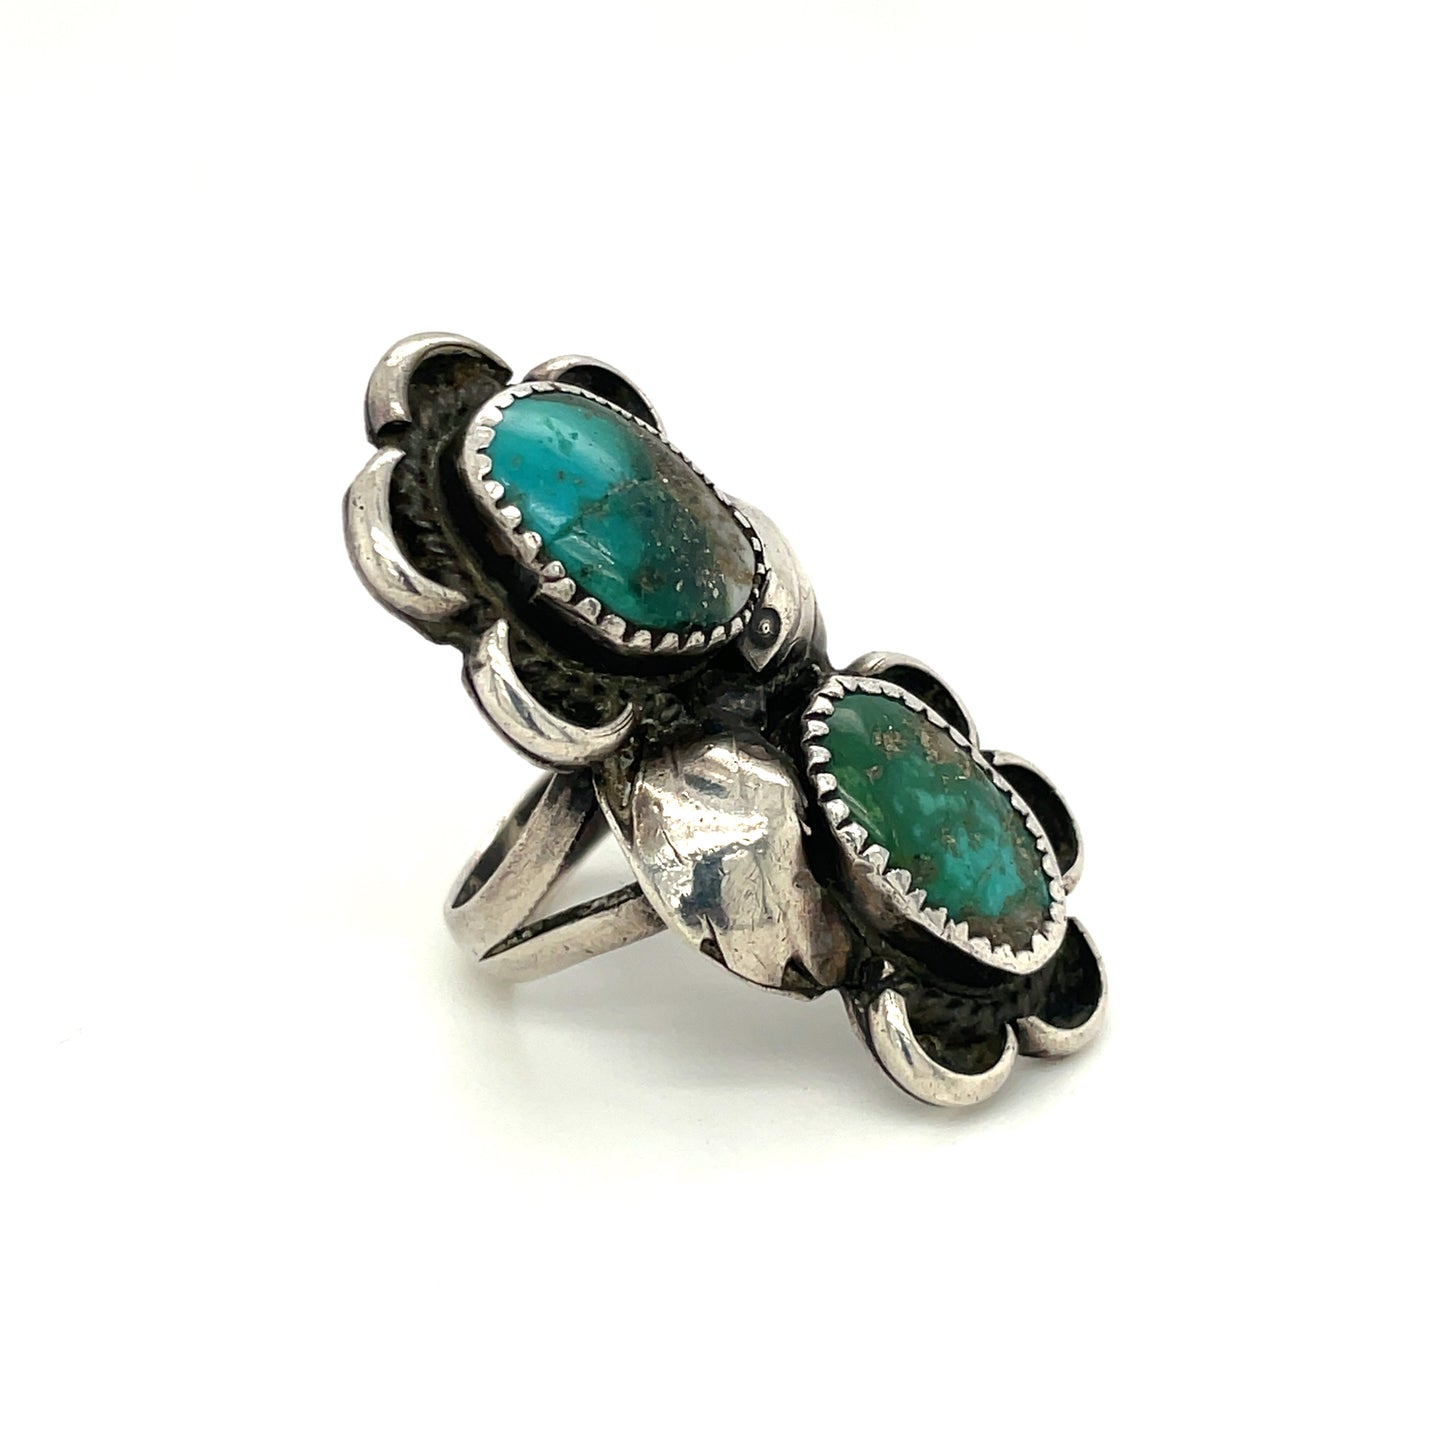 Vintage Southwestern Sterling Silver and Turquoise Ring Size 6